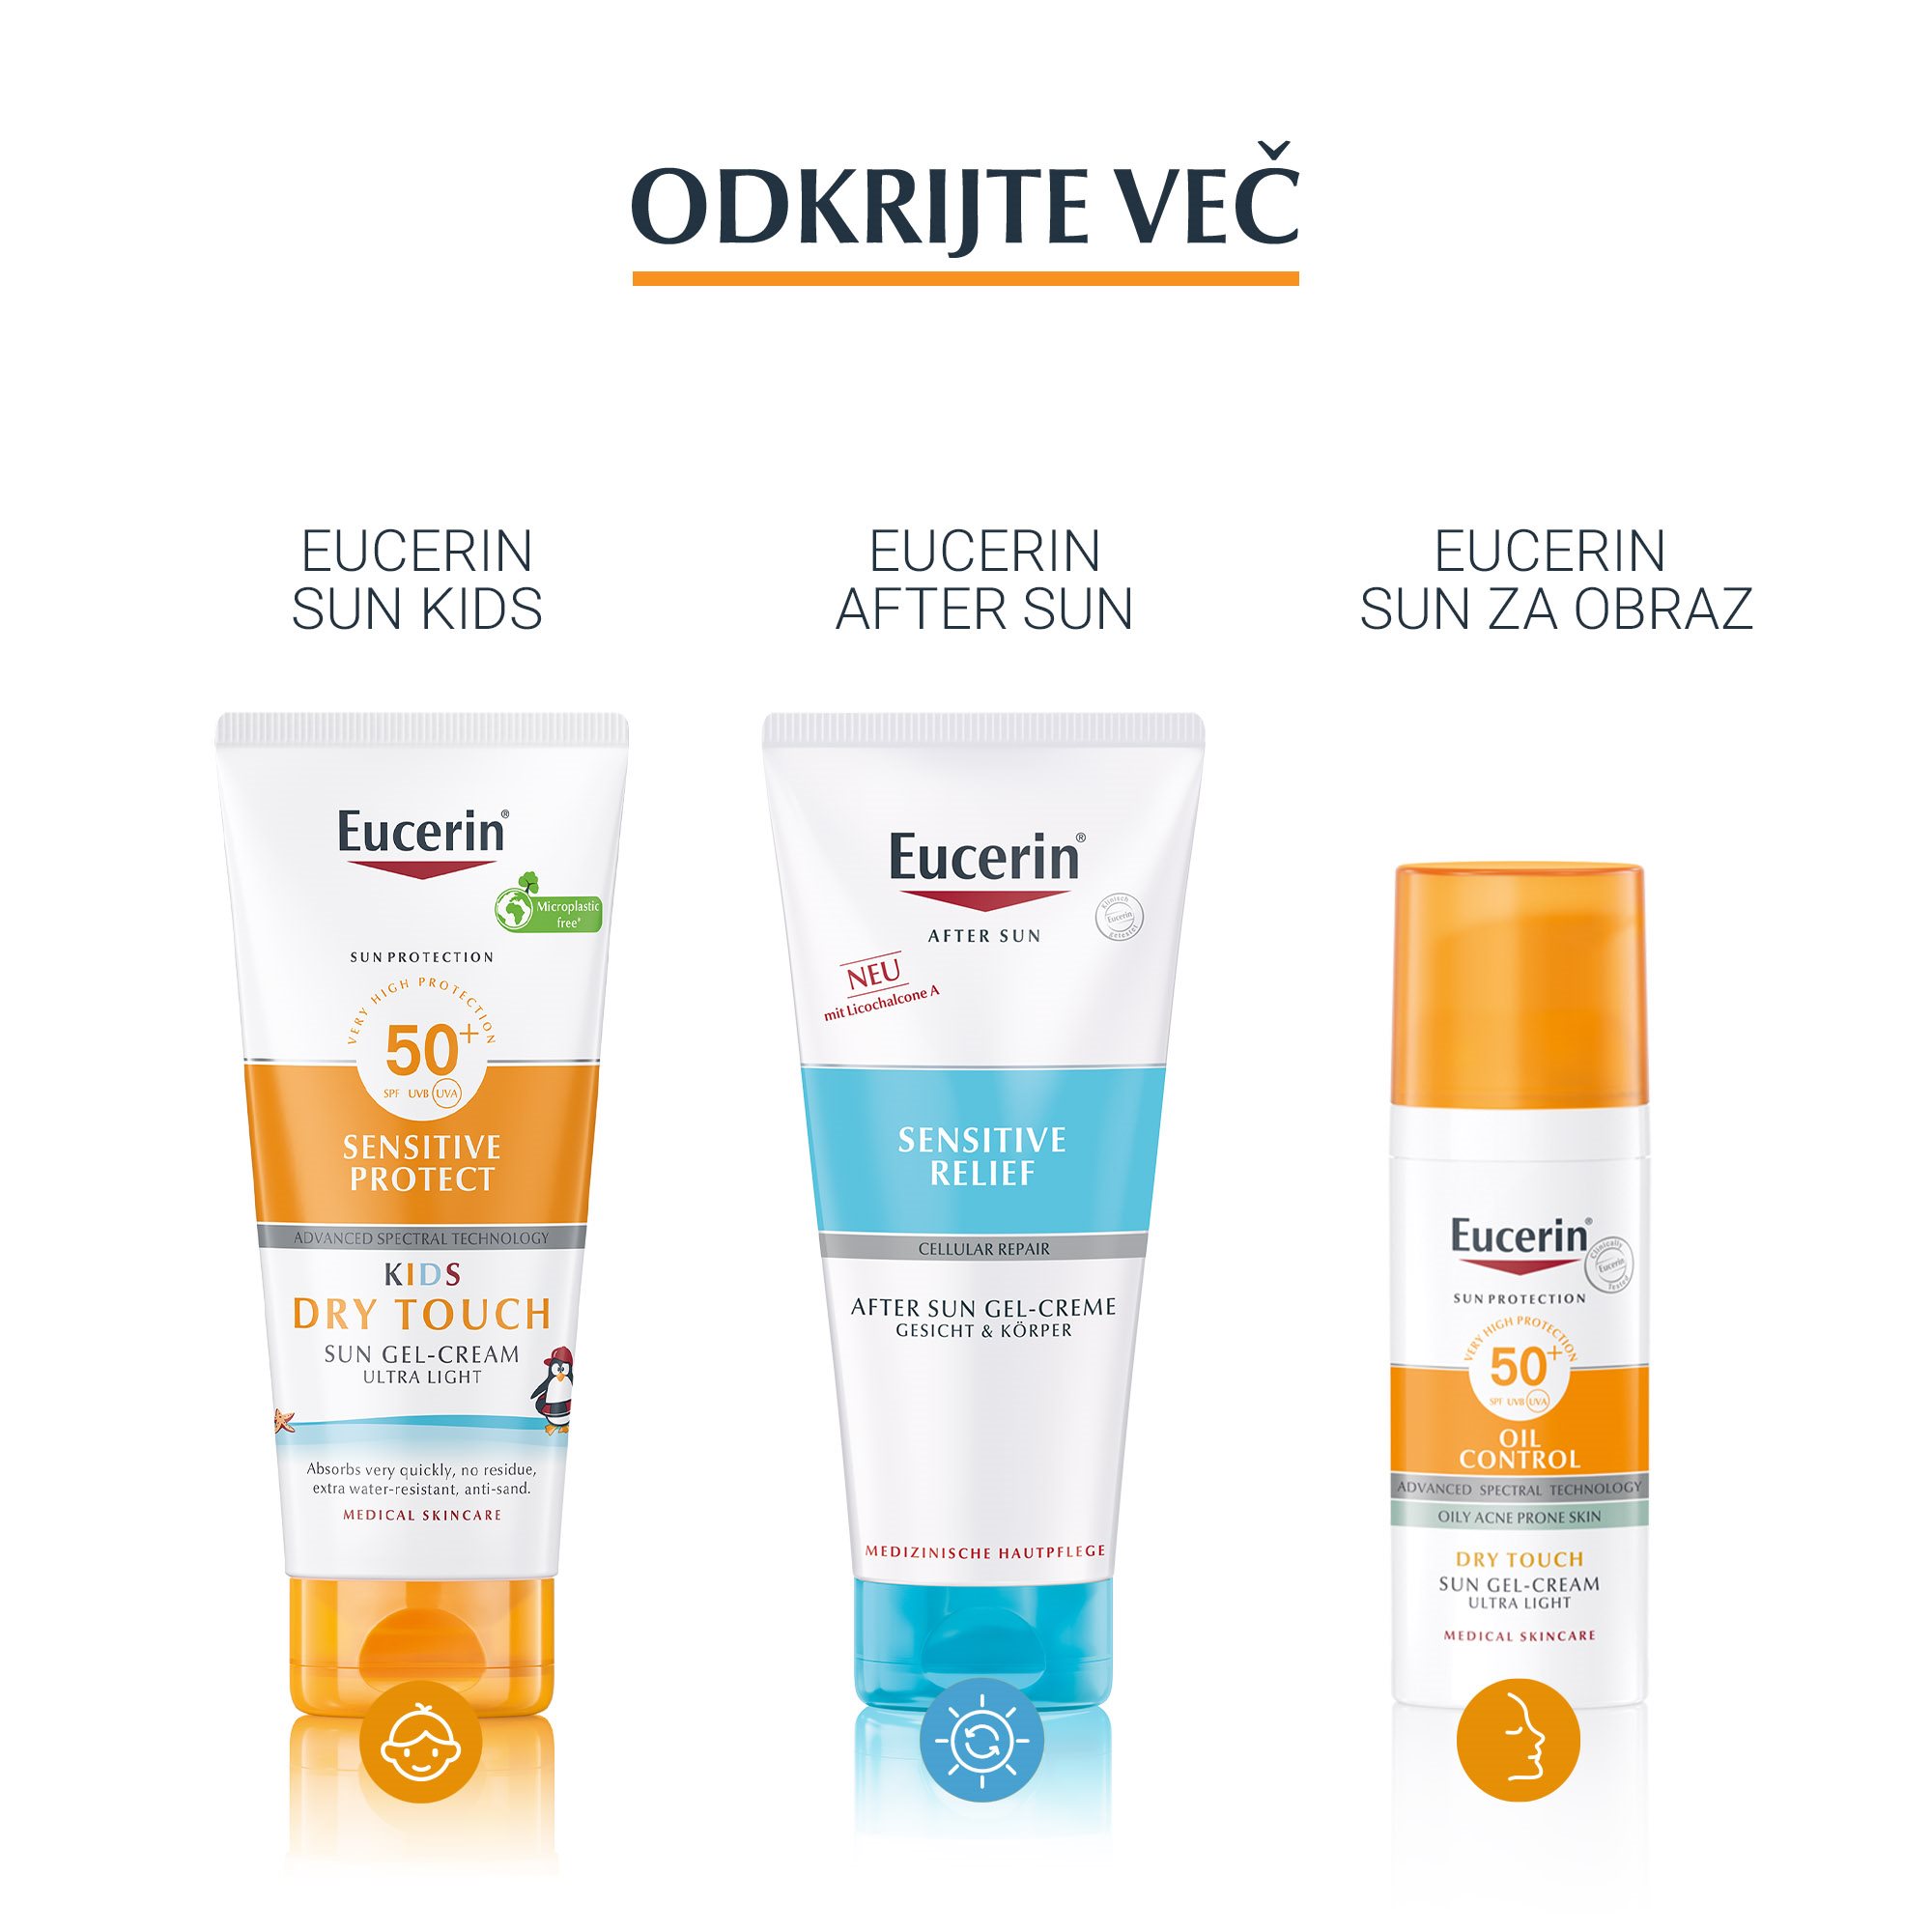 Eucerin Sun Protection Photoaging Control Tinted SPF 50+ Light offers effective sun protection. 